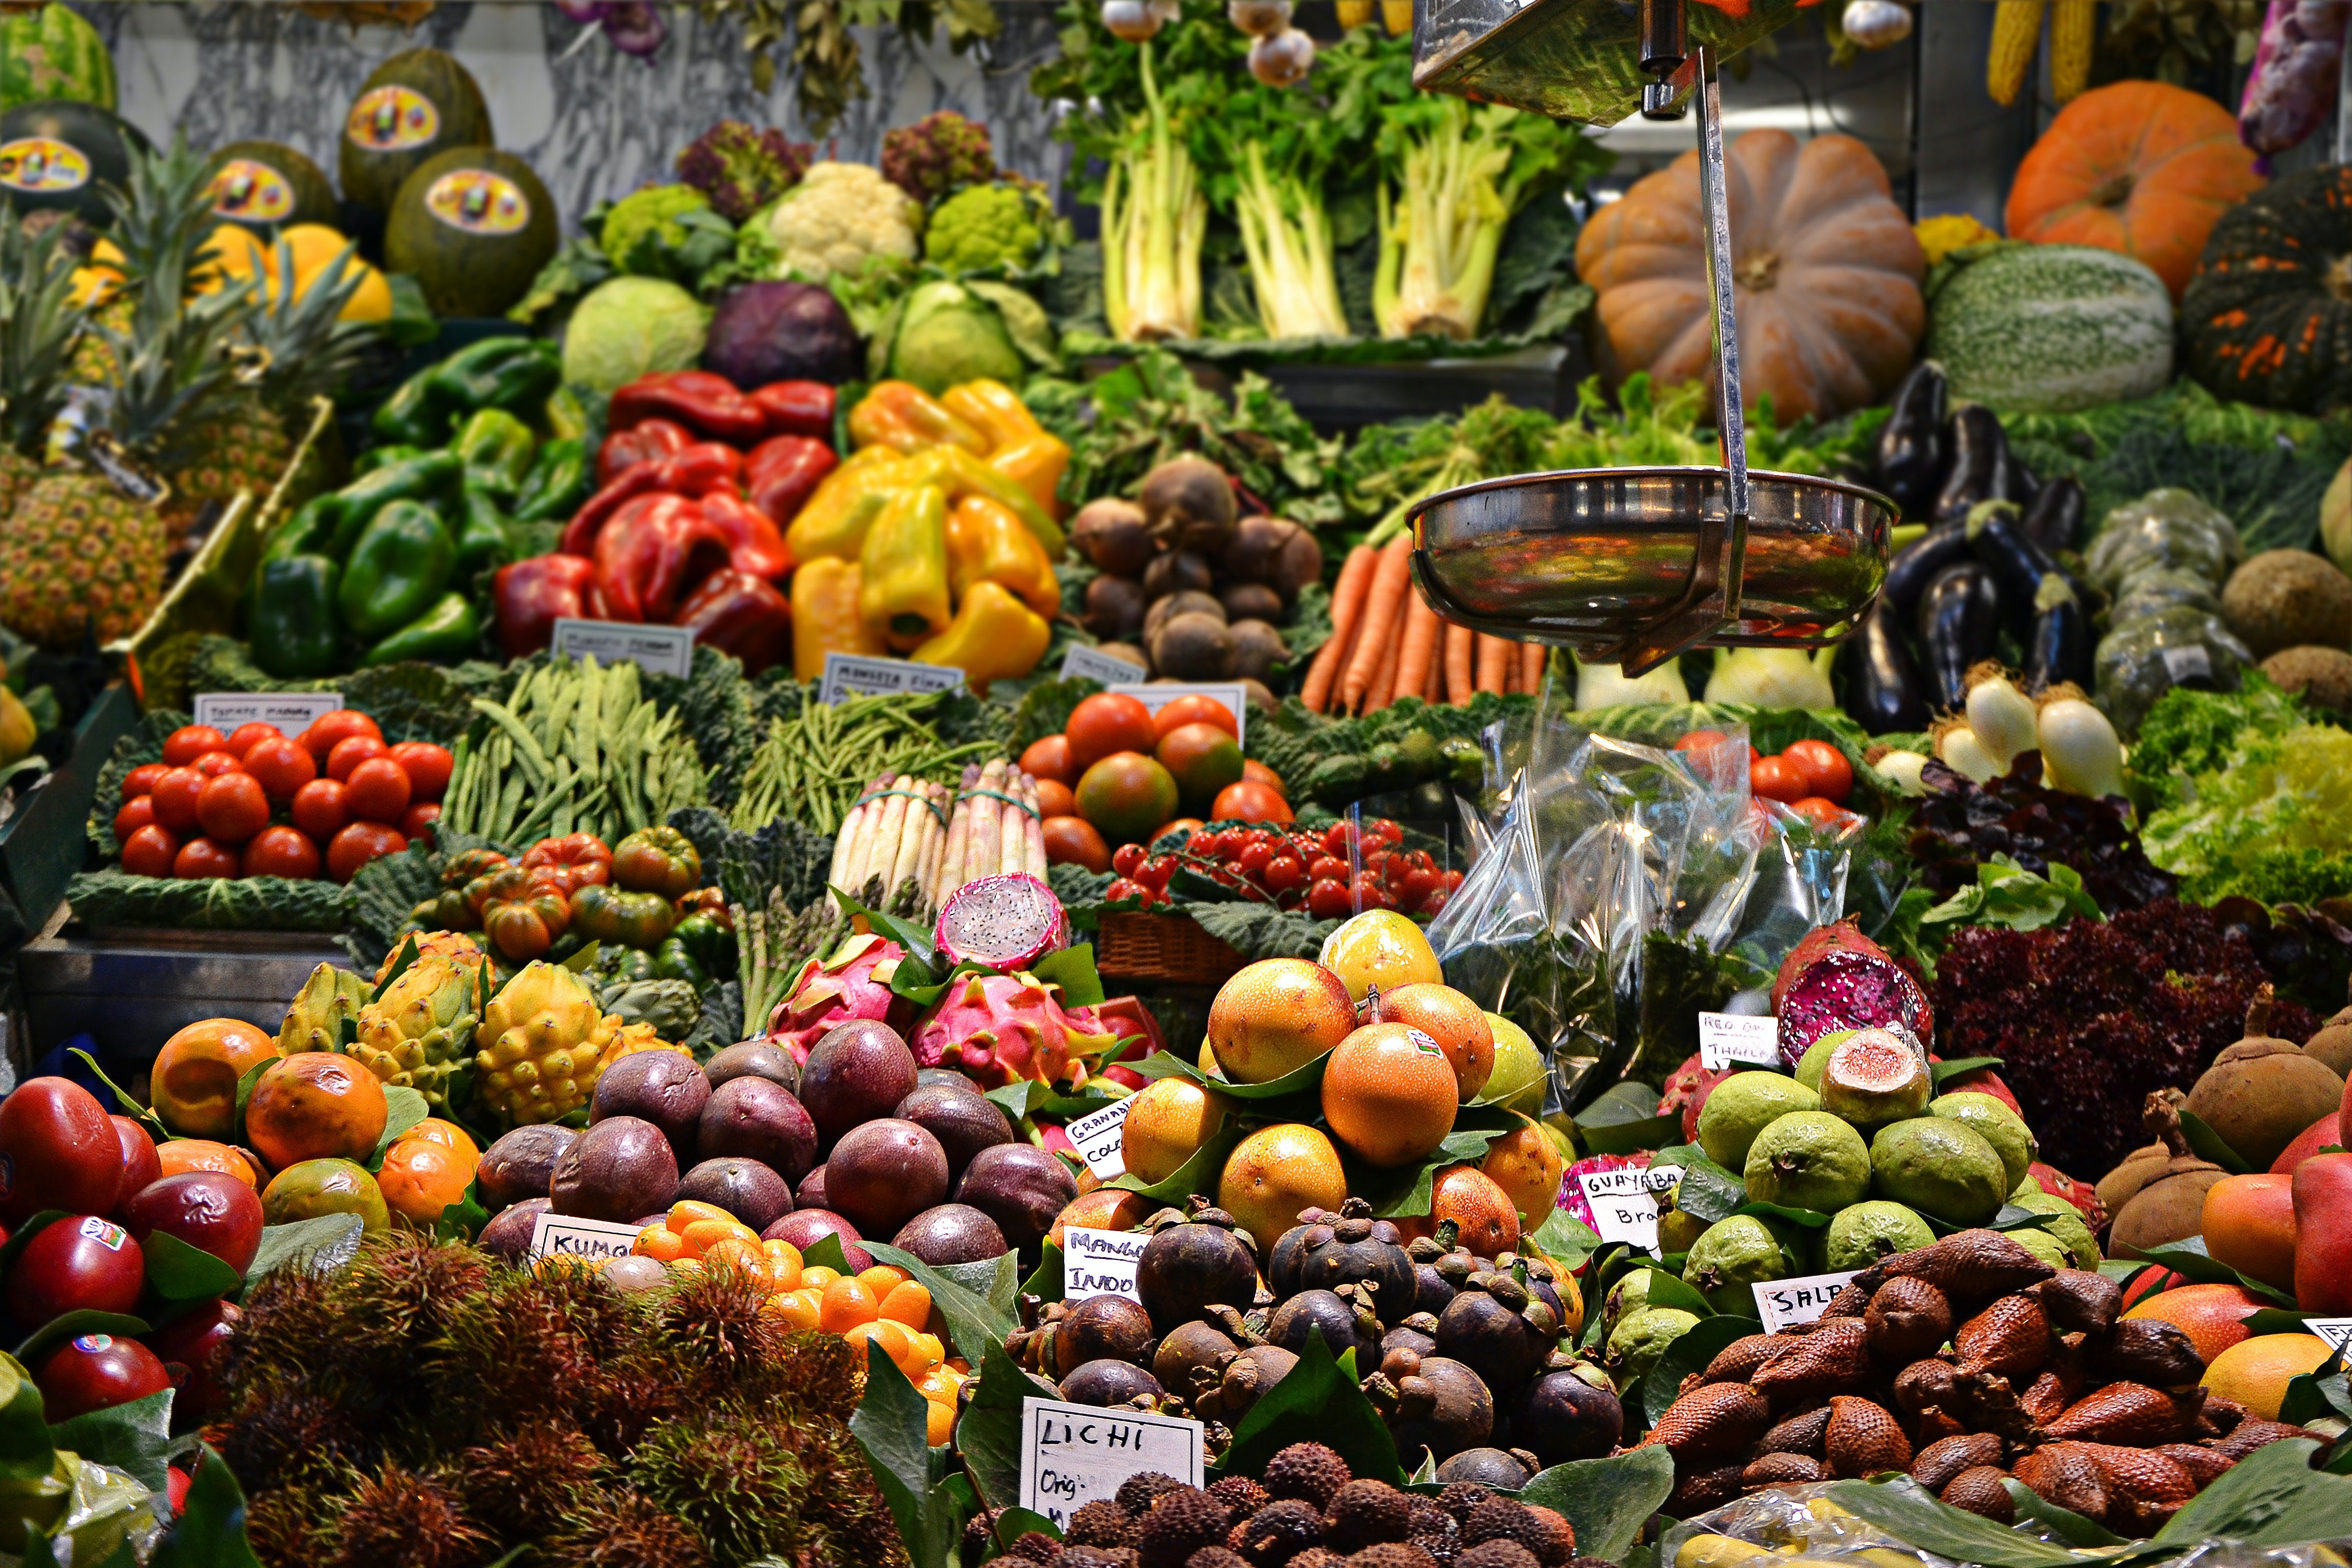 A fruit and veg stall with a colourful range of fruit and vegetables